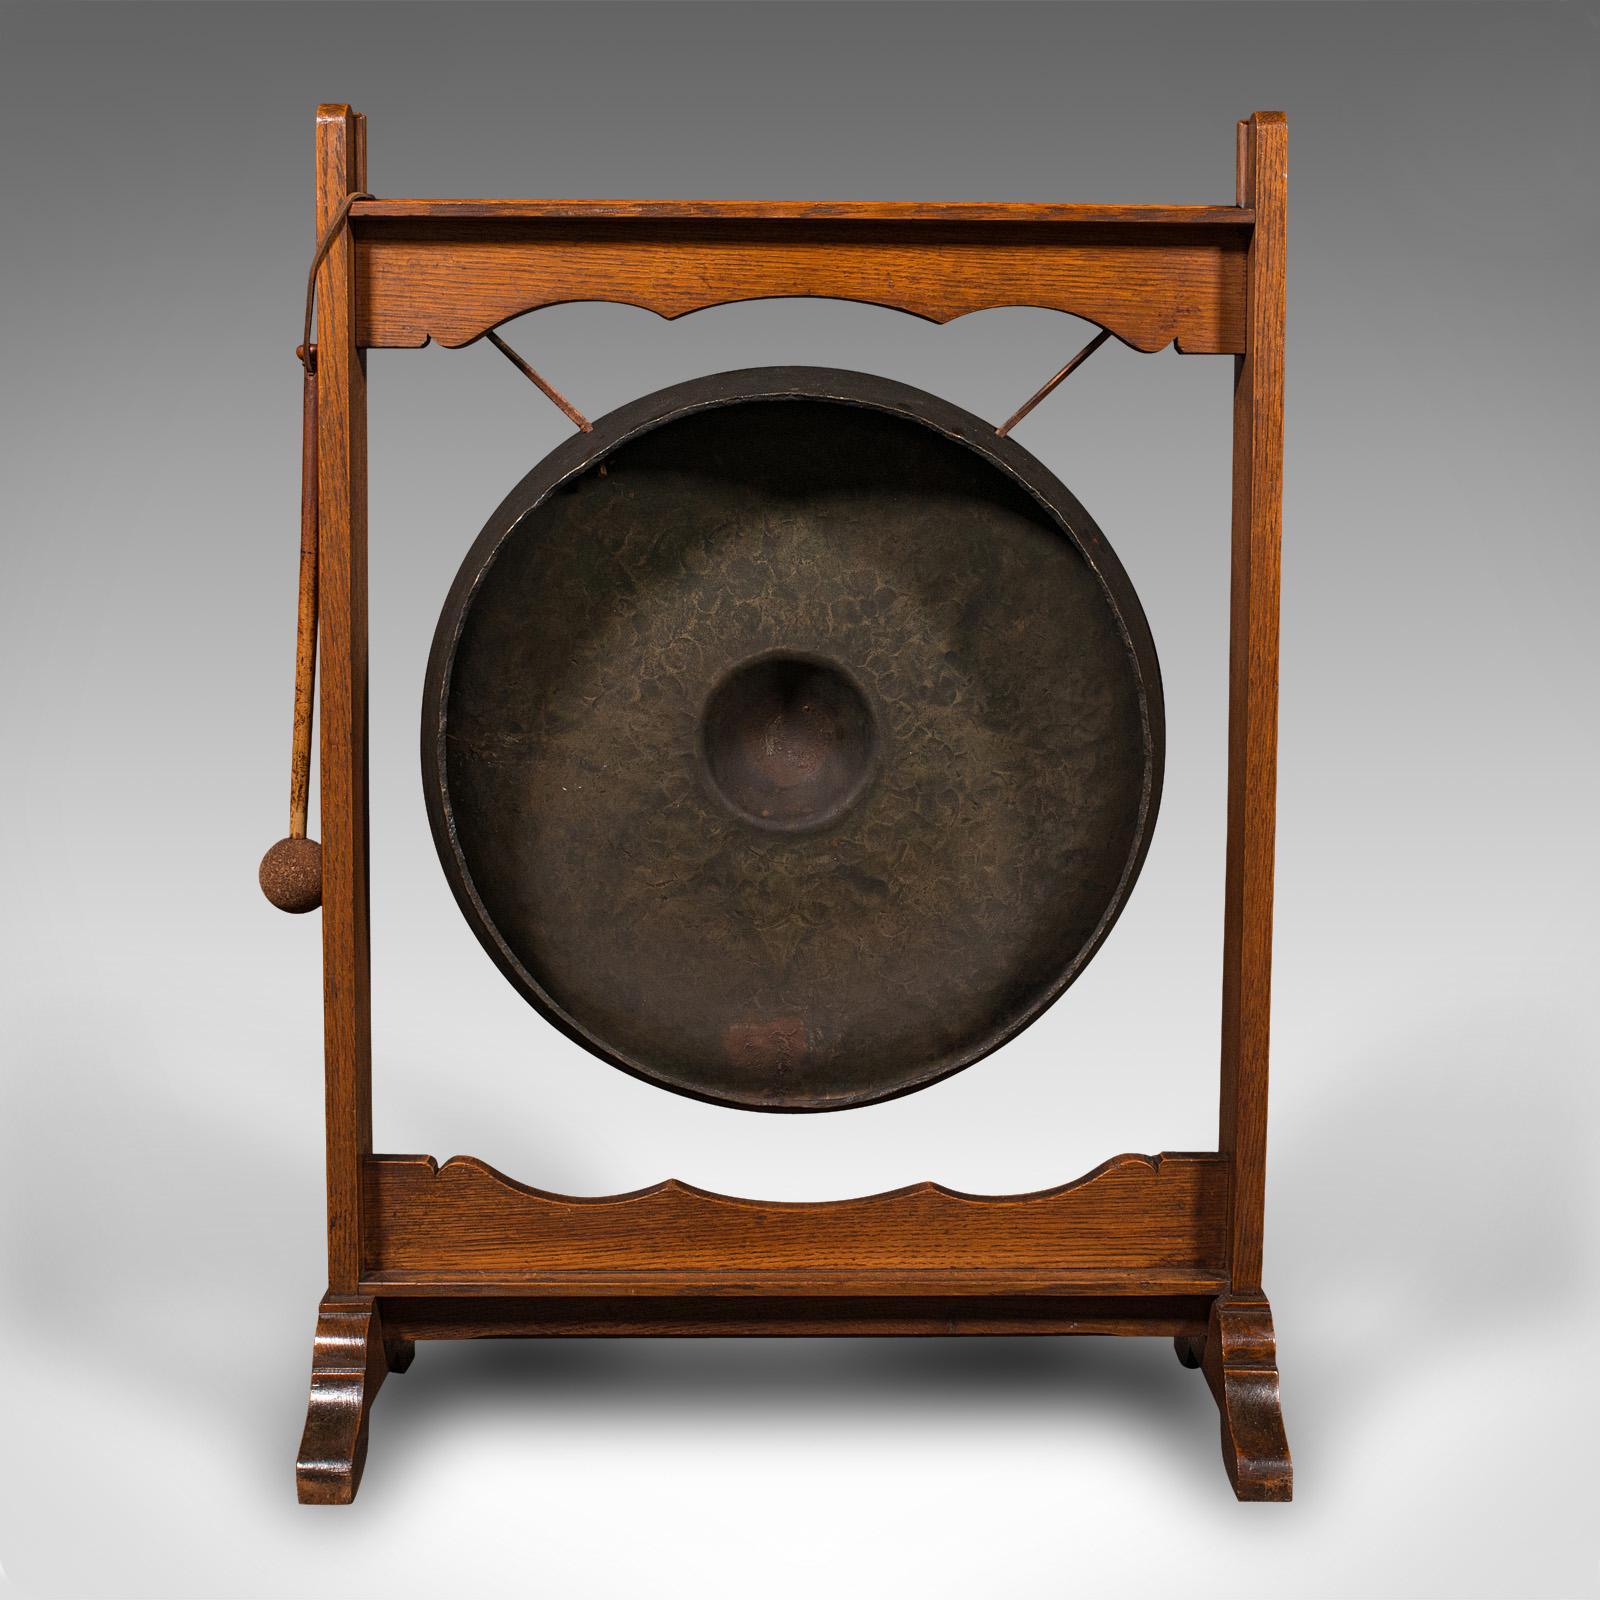 antique gong